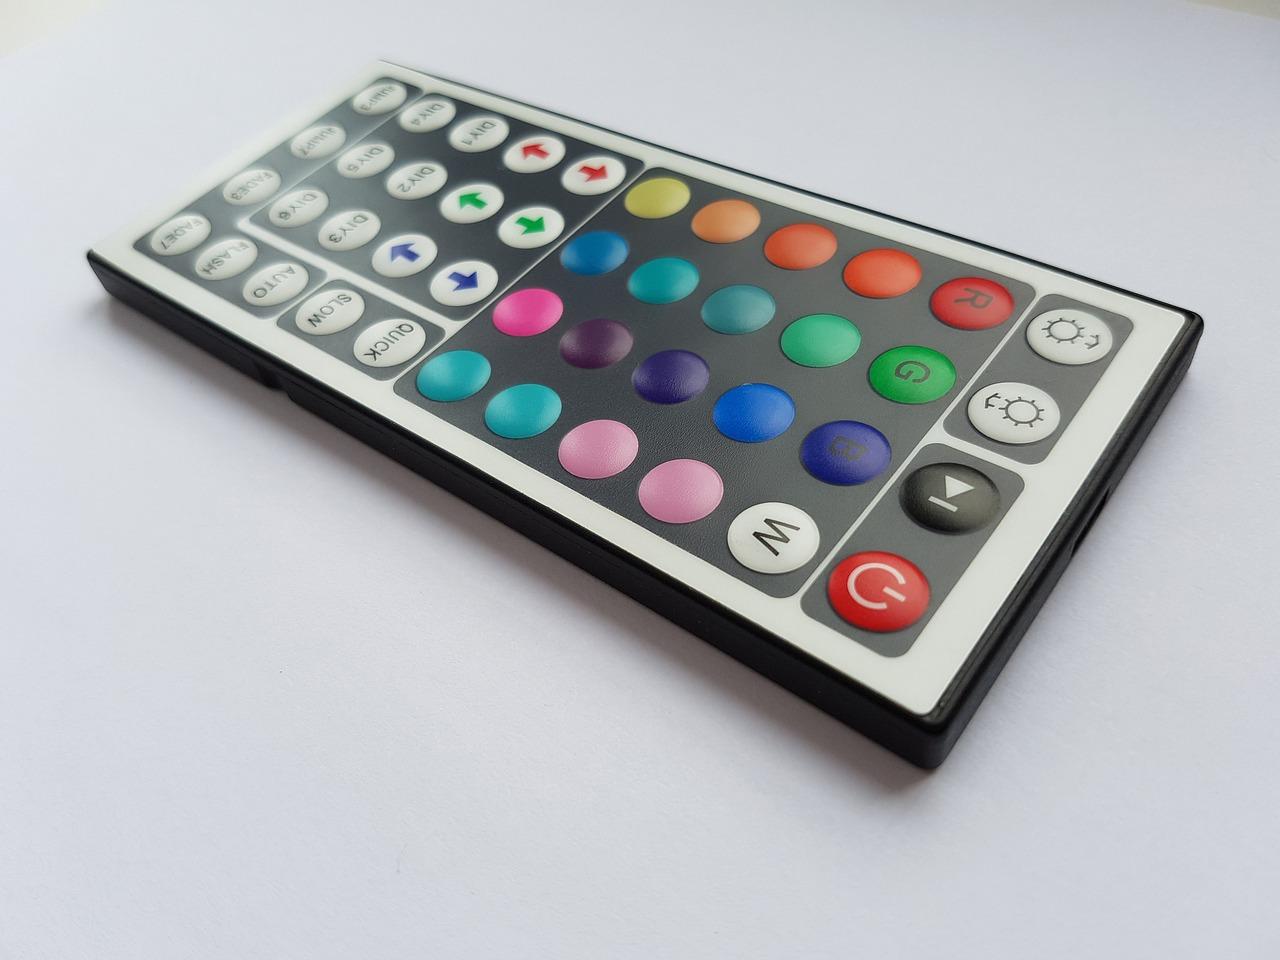  How To Use Diy Buttons On Led Remote 